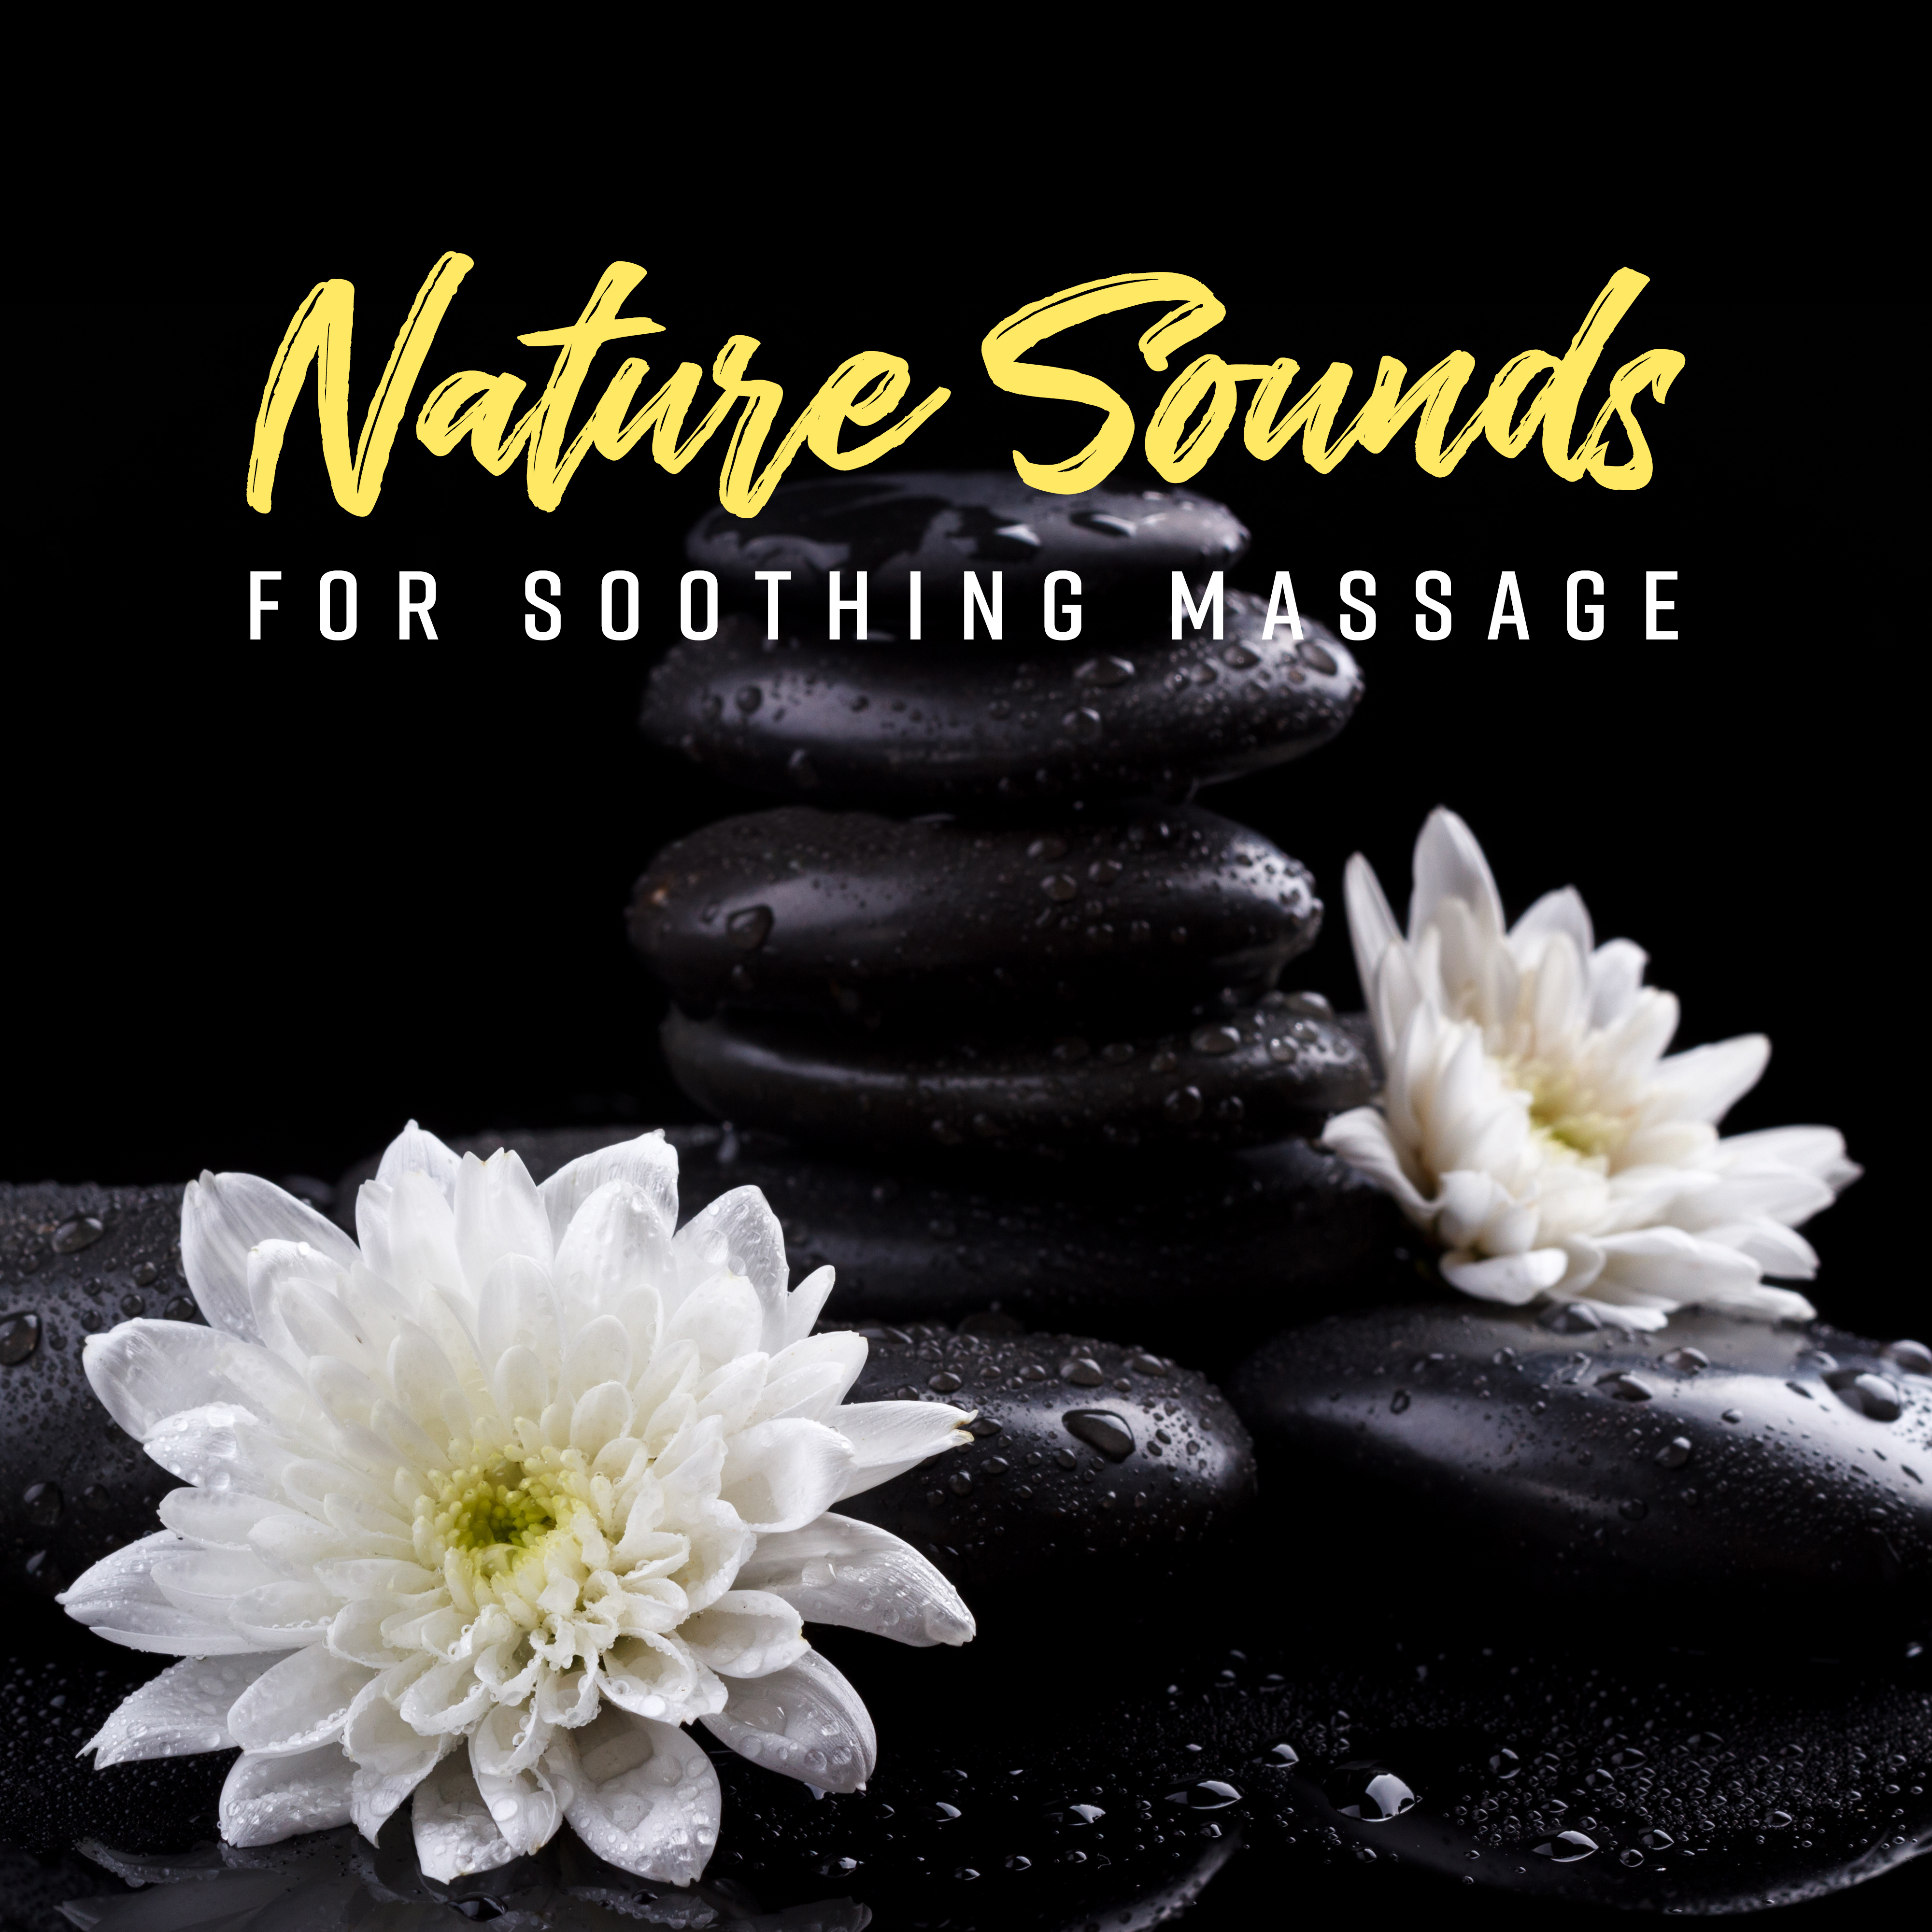 Nature Sounds for Soothing Massage